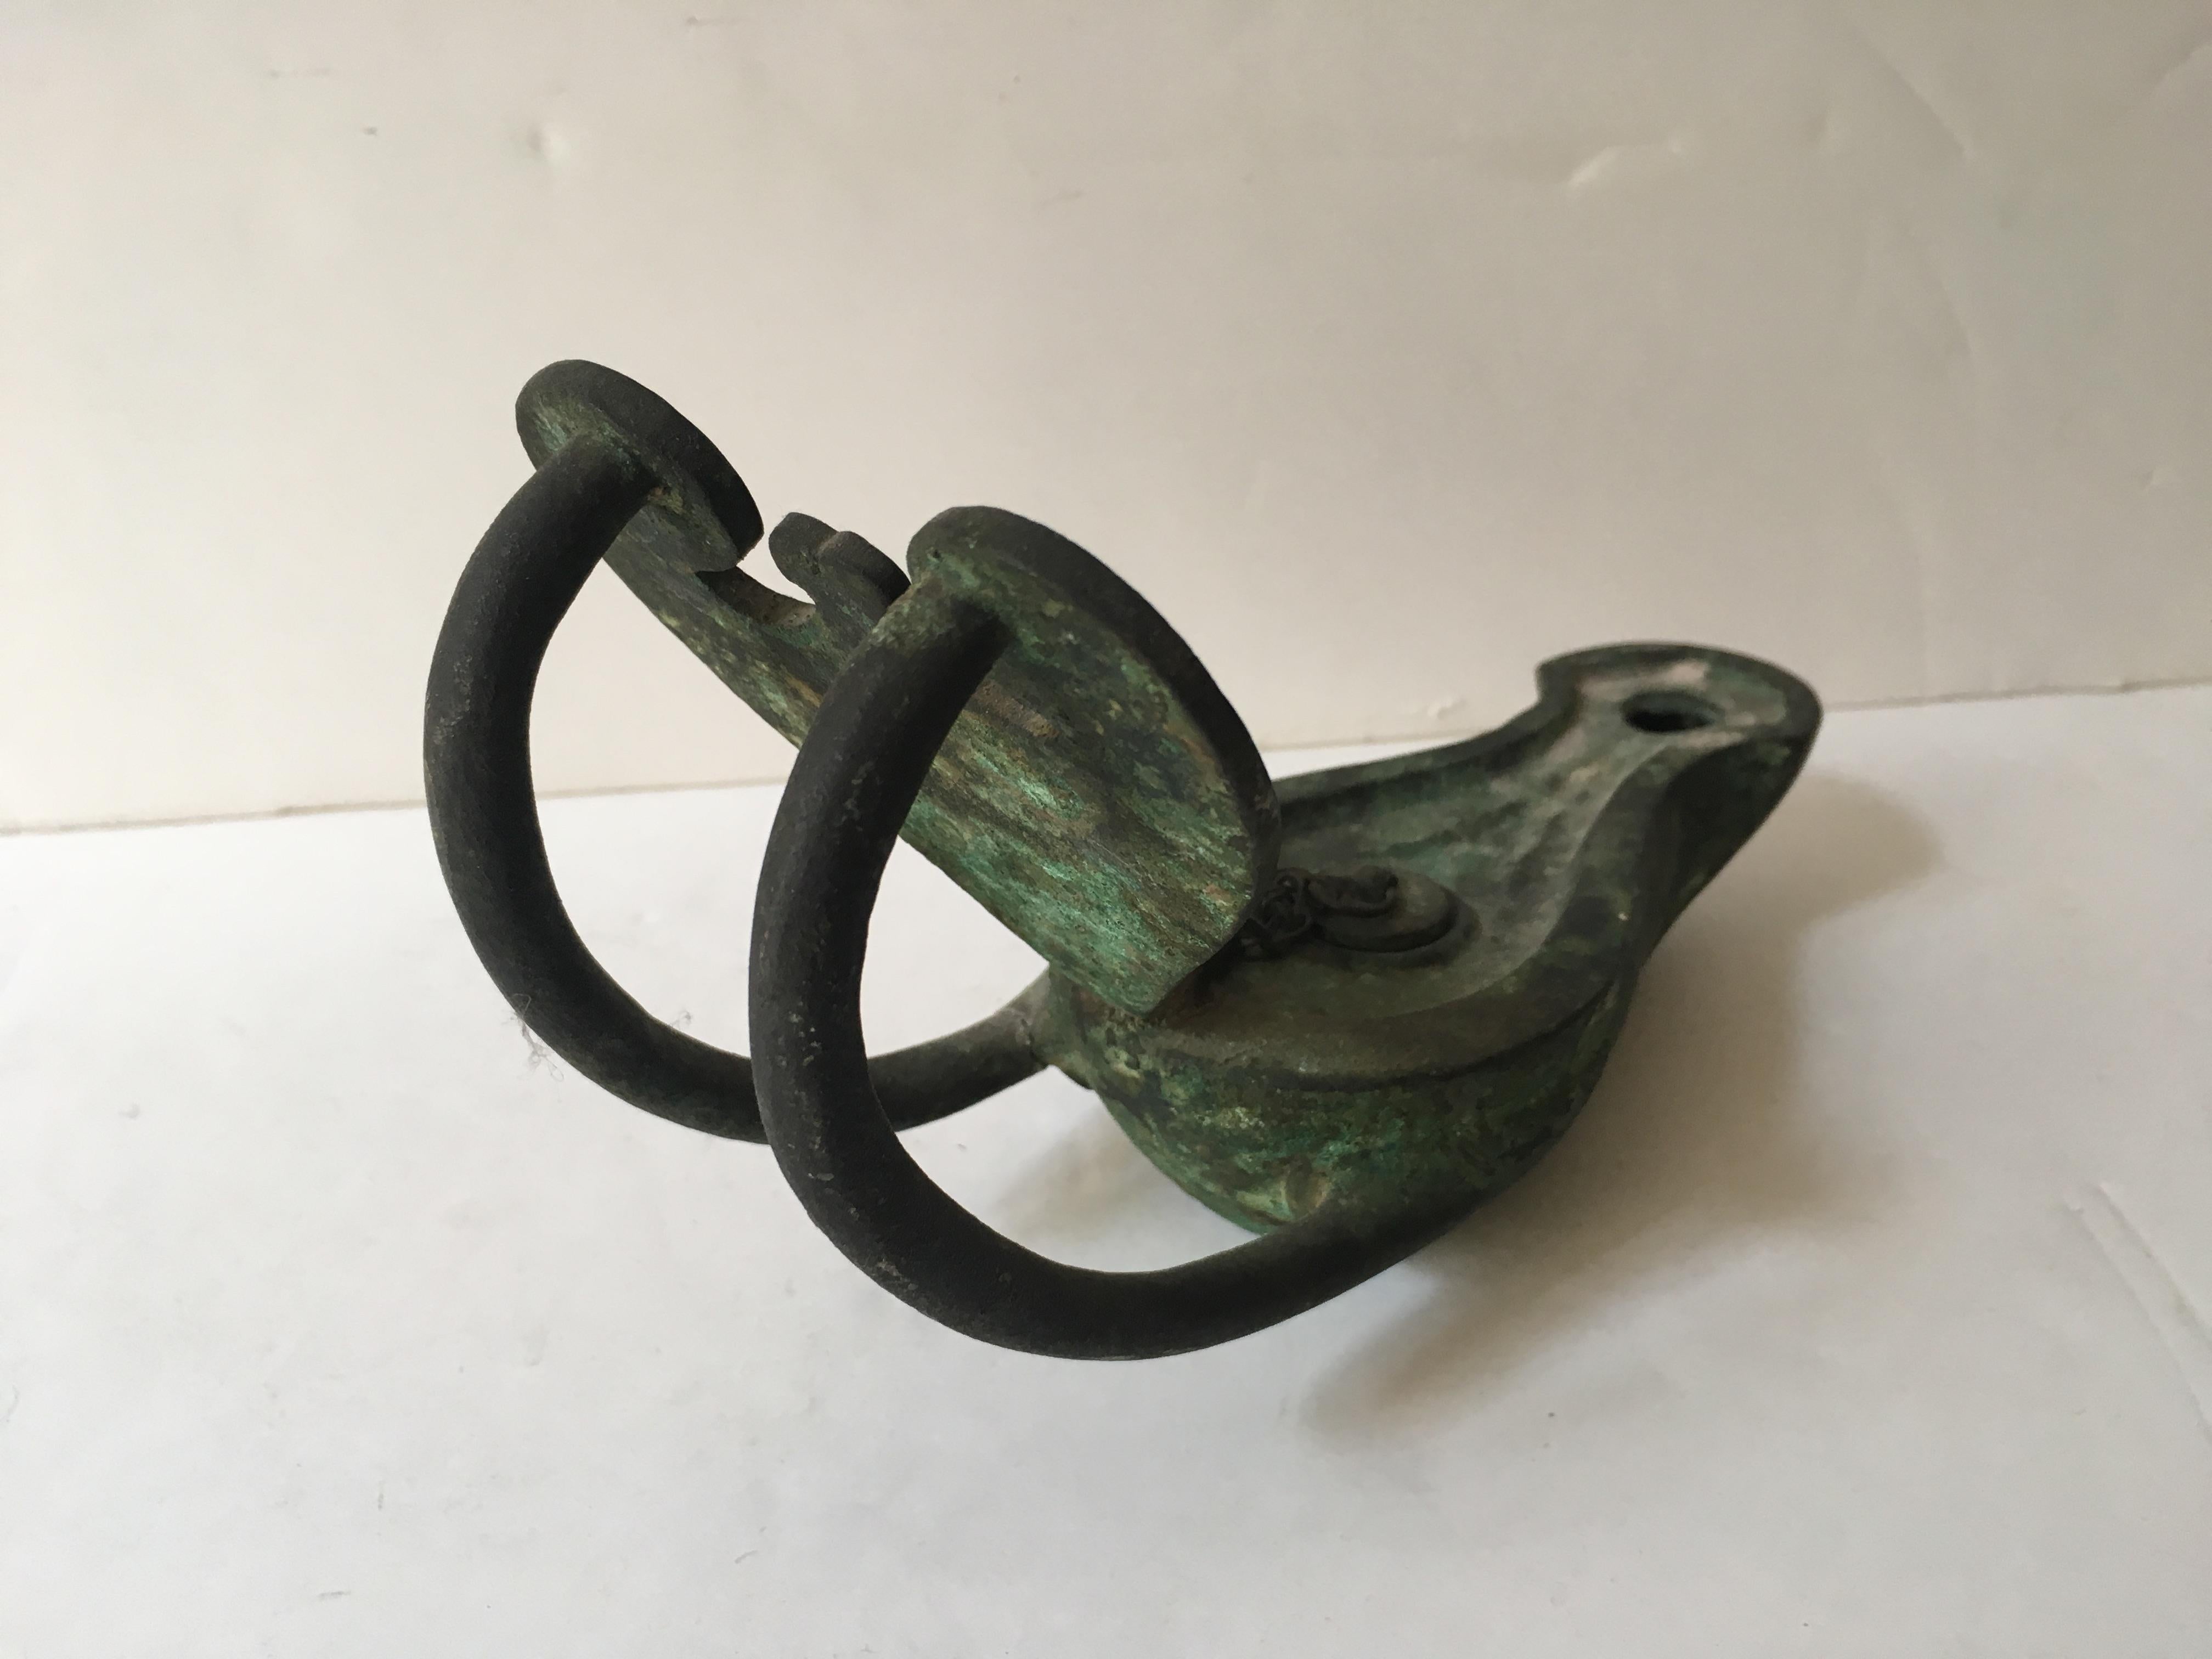 A roman bronze oil lamp, with a monkey sculpture, object of Grand Tour or possibly ancient.